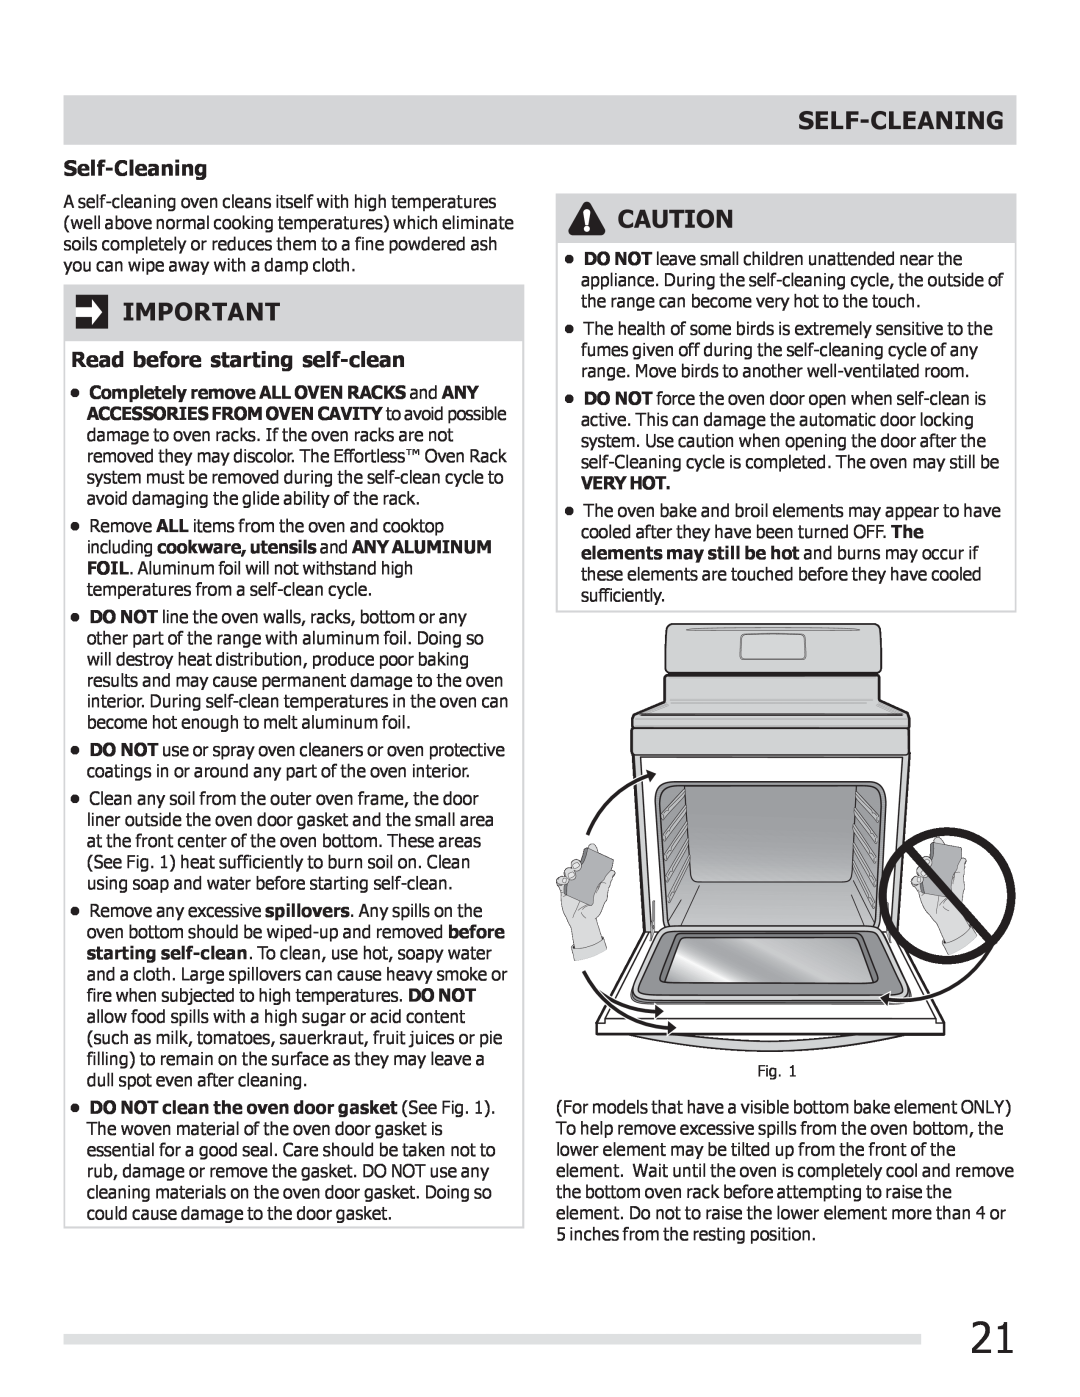 Frigidaire FGEF3041KF manual Self-Cleaning, Read before starting self-clean 